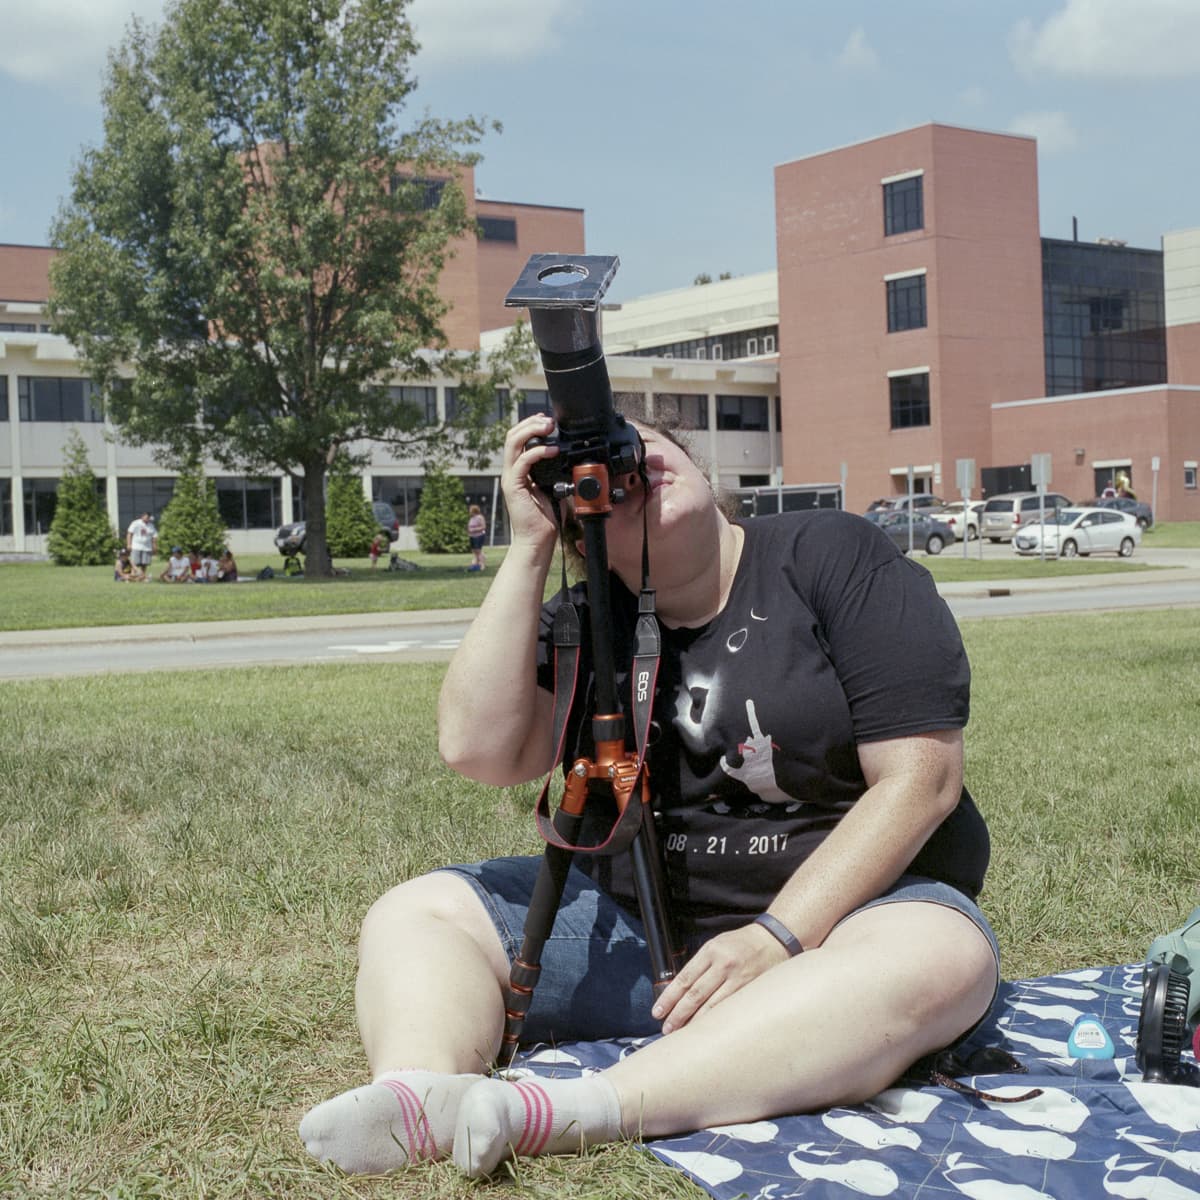 An analog portrait of a woman watching the event at SIU in Carbondale, Illinois